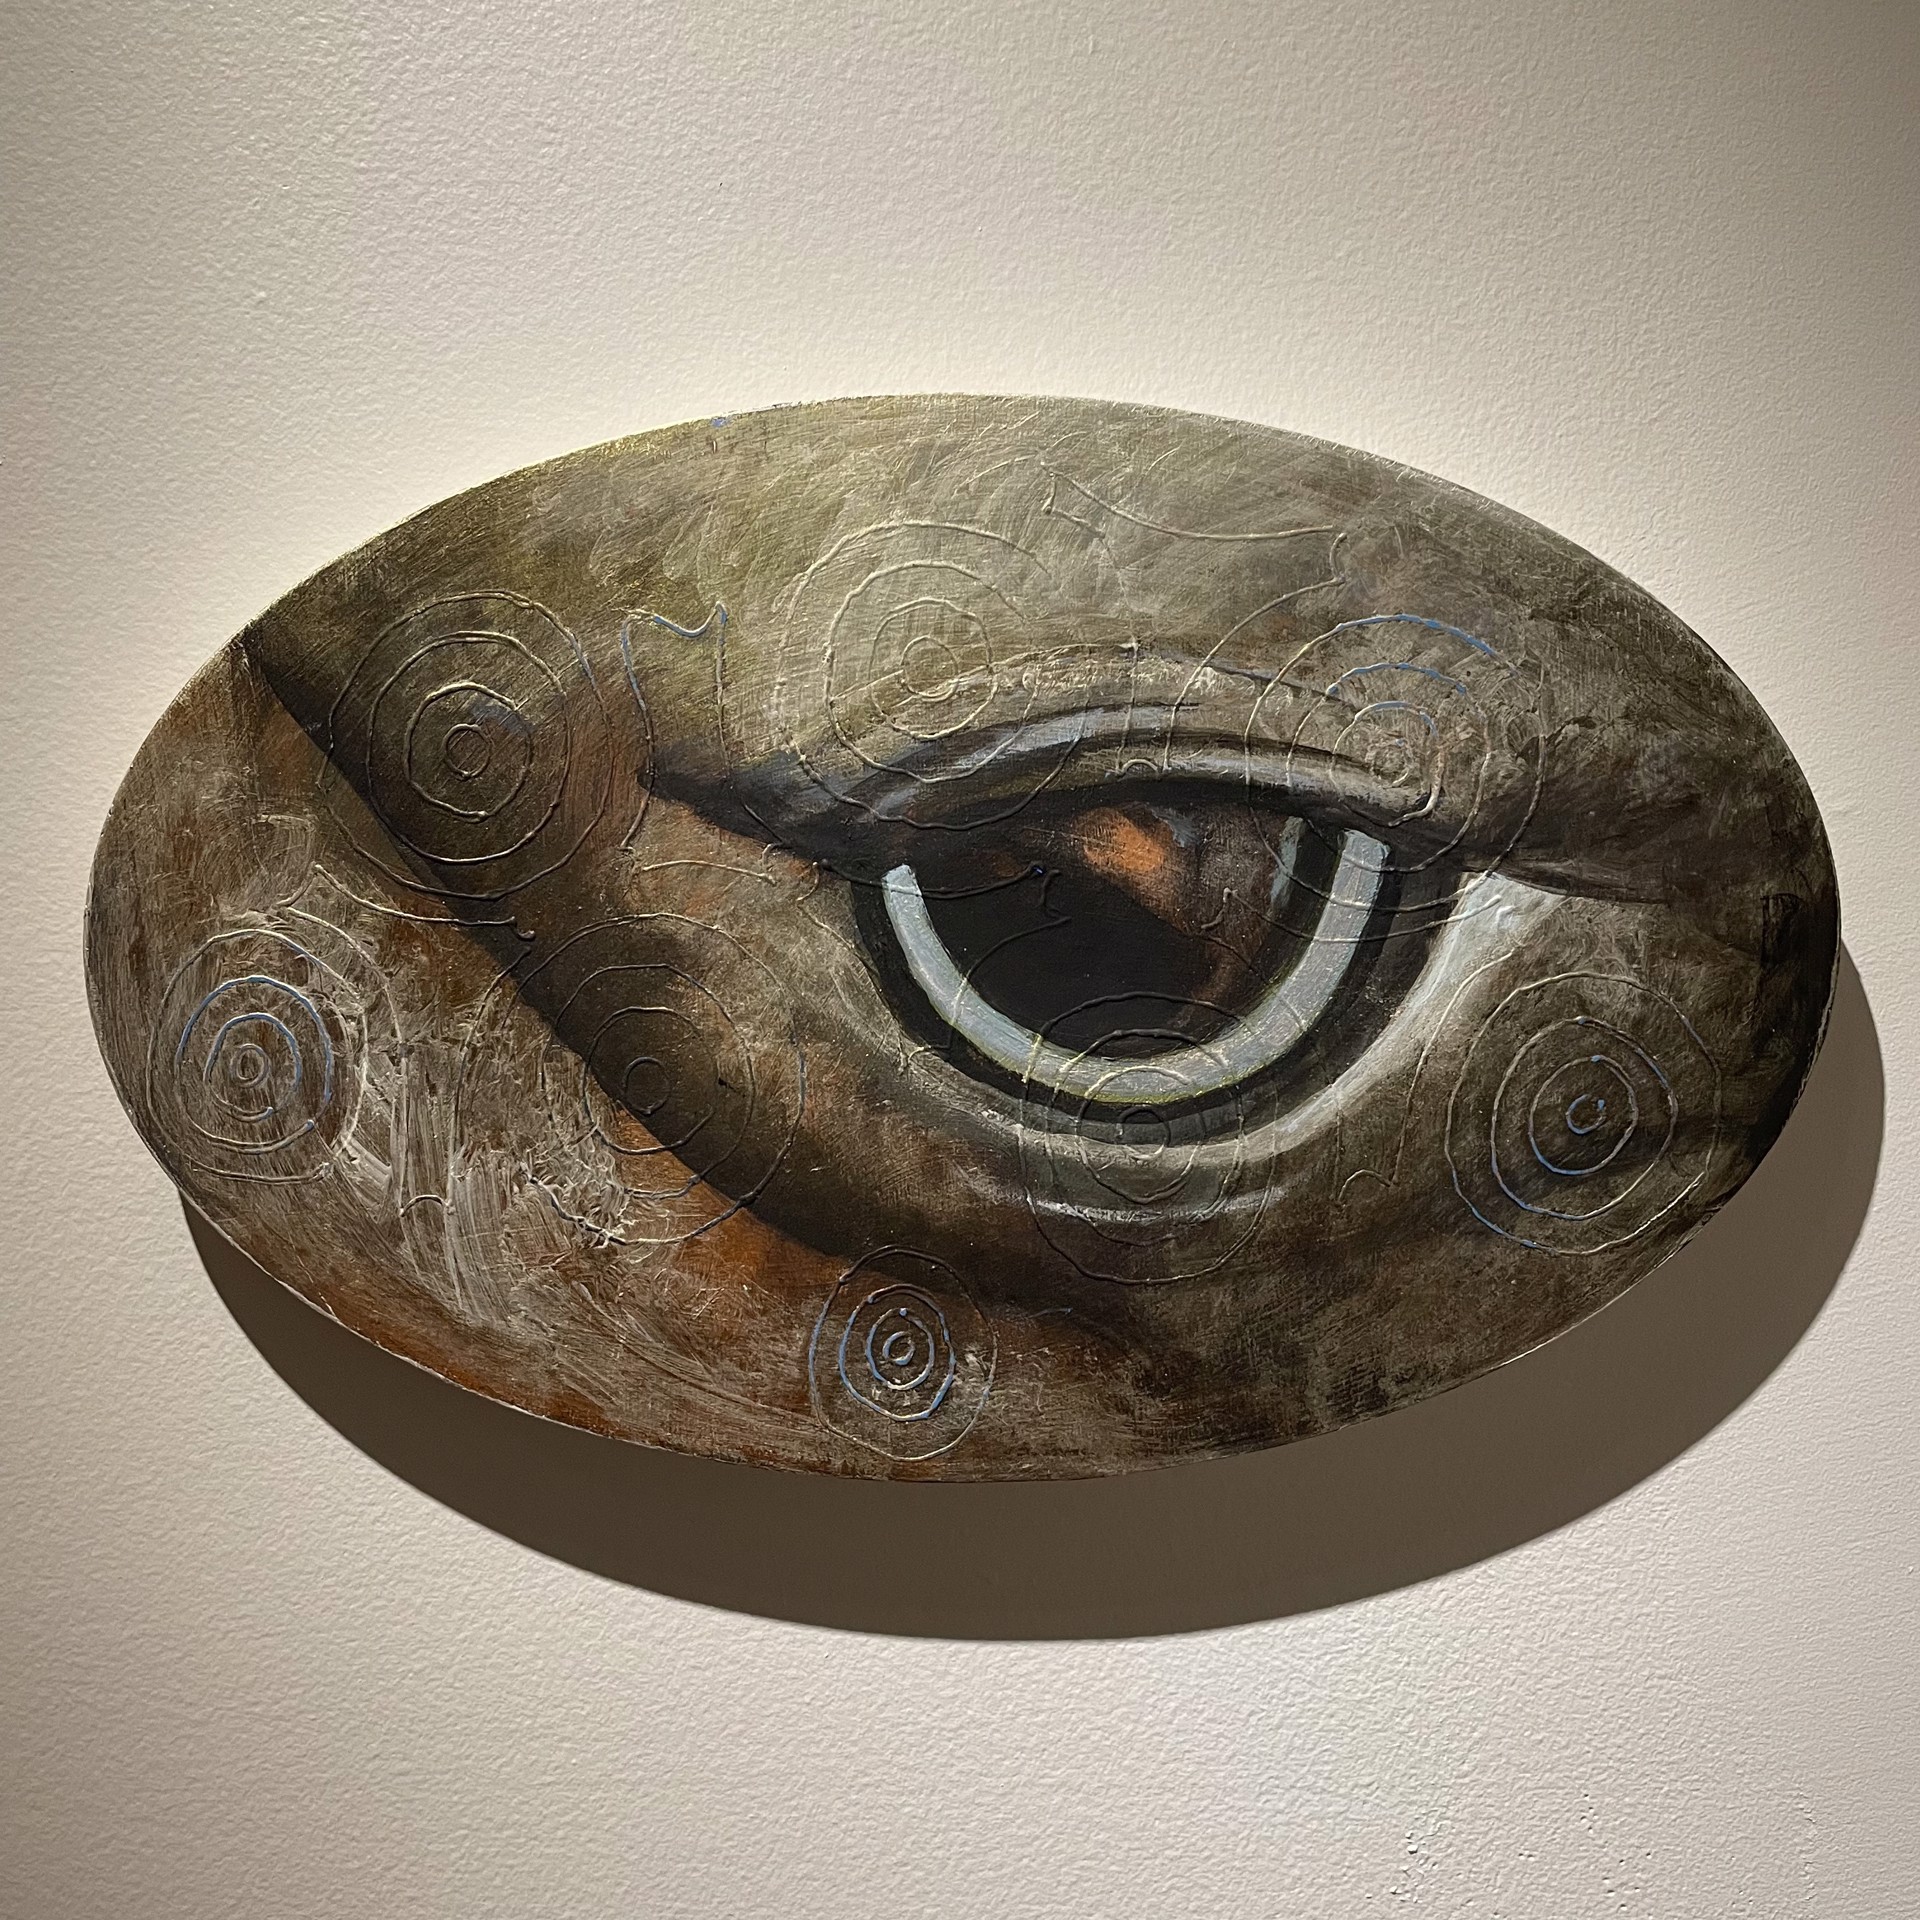 The Whale's Eye by Jacqueline May